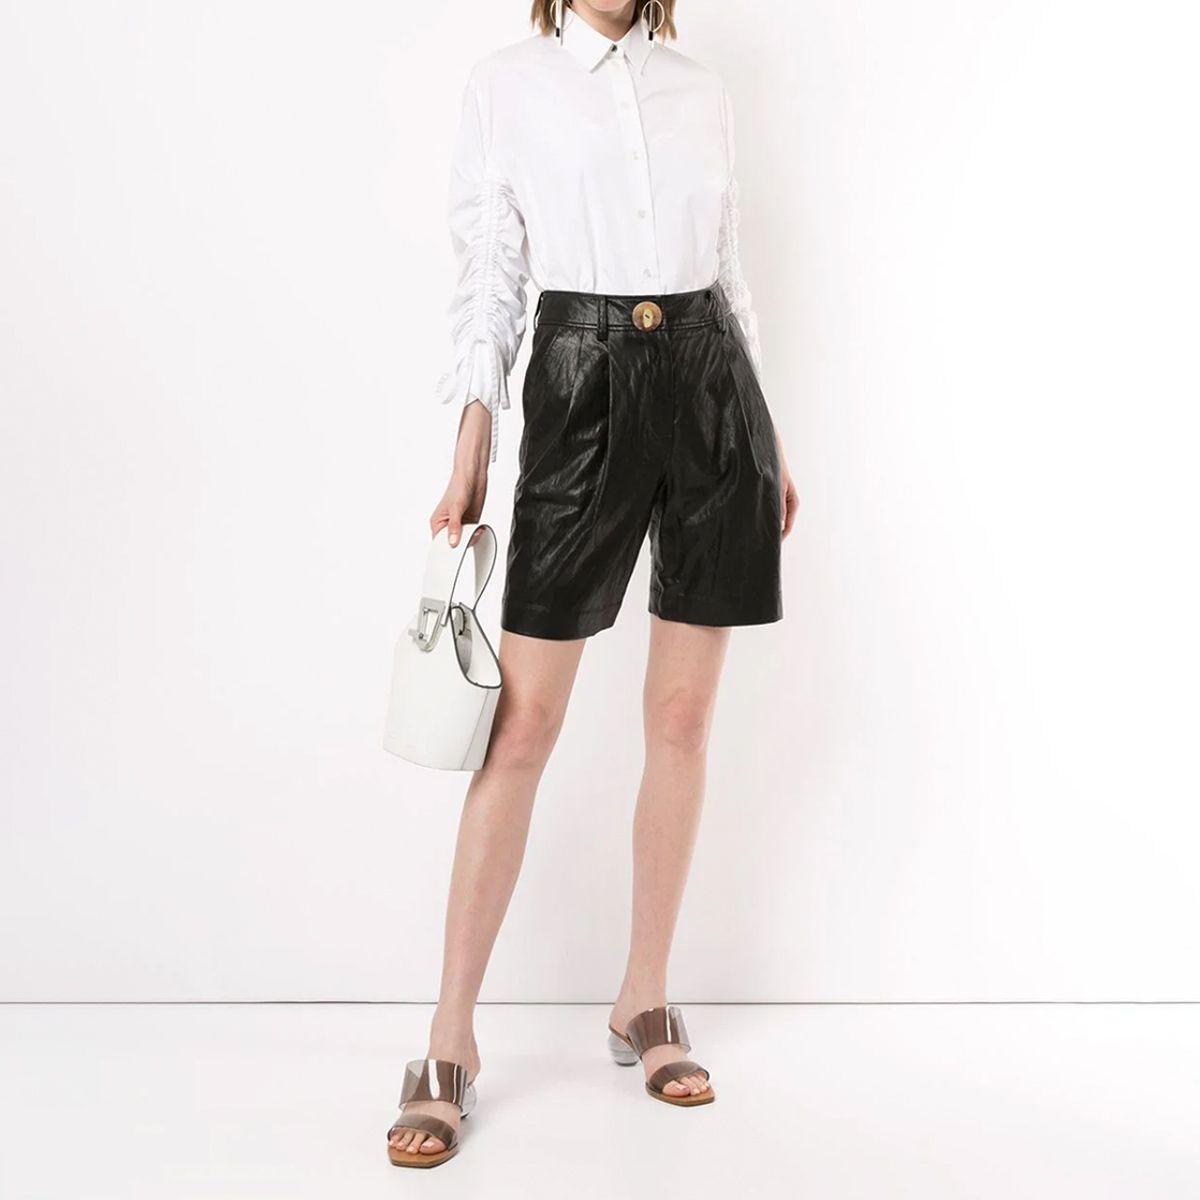 Bermuda Shorts Are the Latest Controversial Fall Trend | Who What Wear